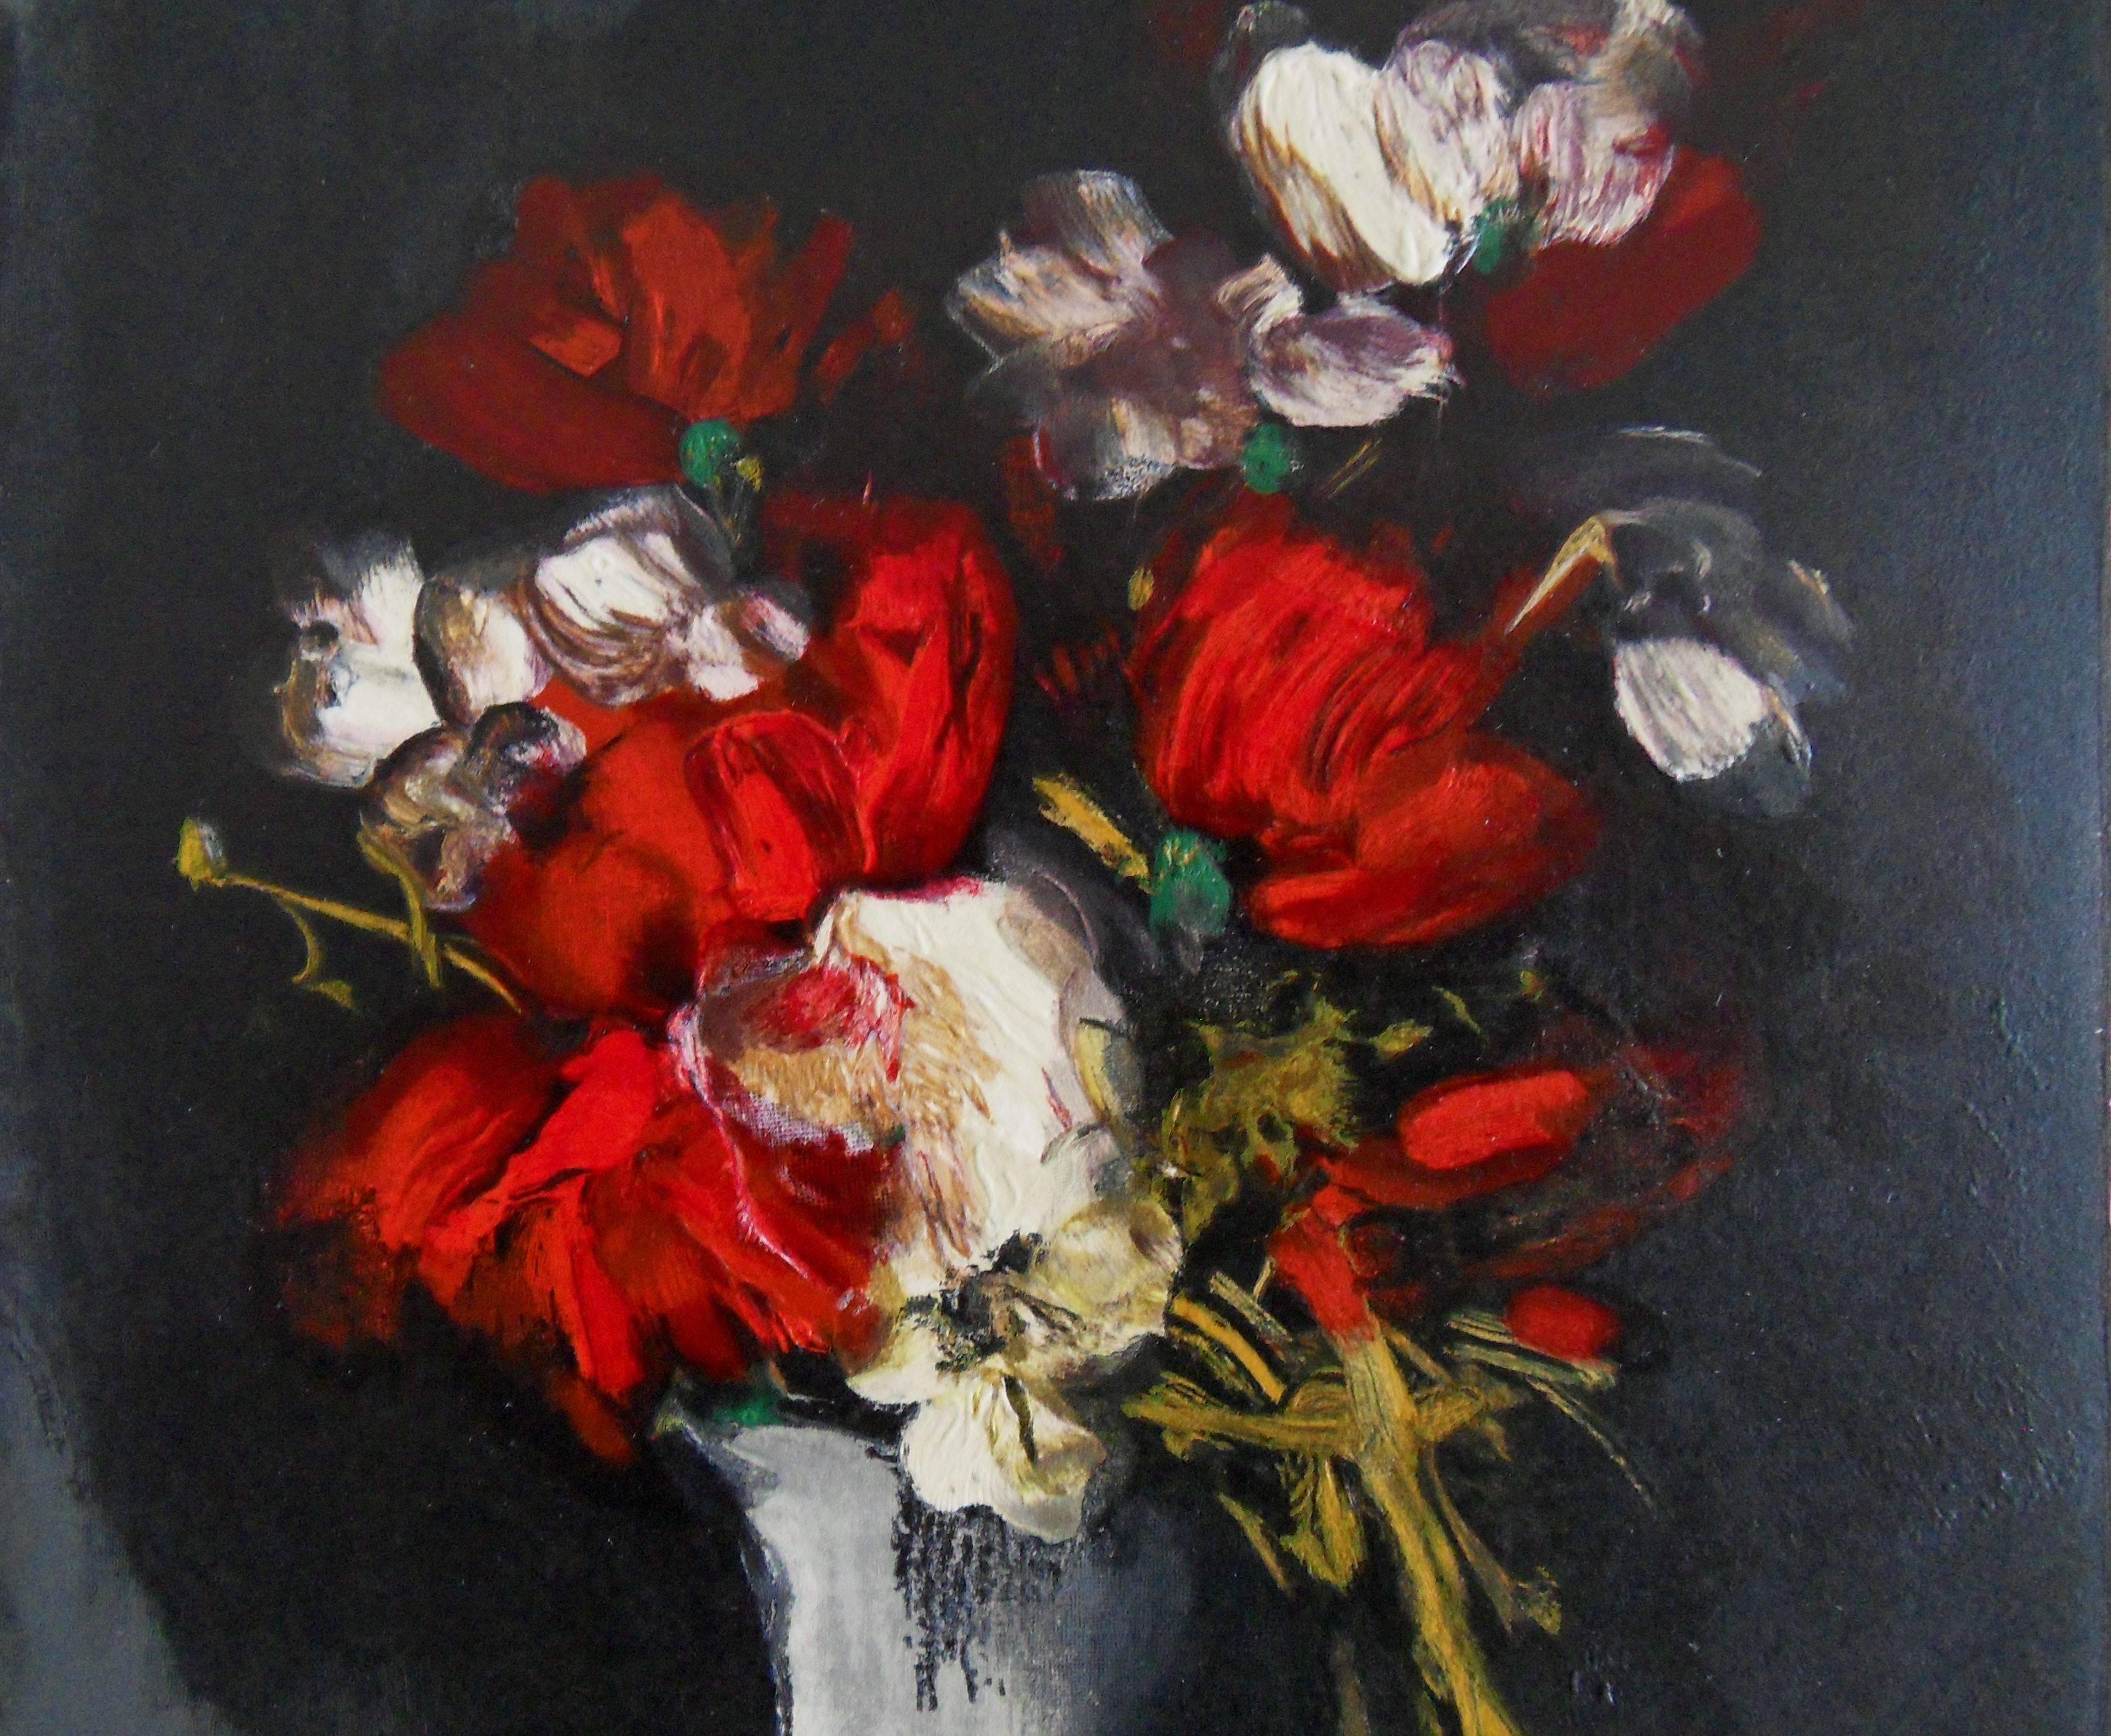 Wild Red and White flowers - Original woodcut on Arches Vellum - Realist Print by Maurice de Vlaminck